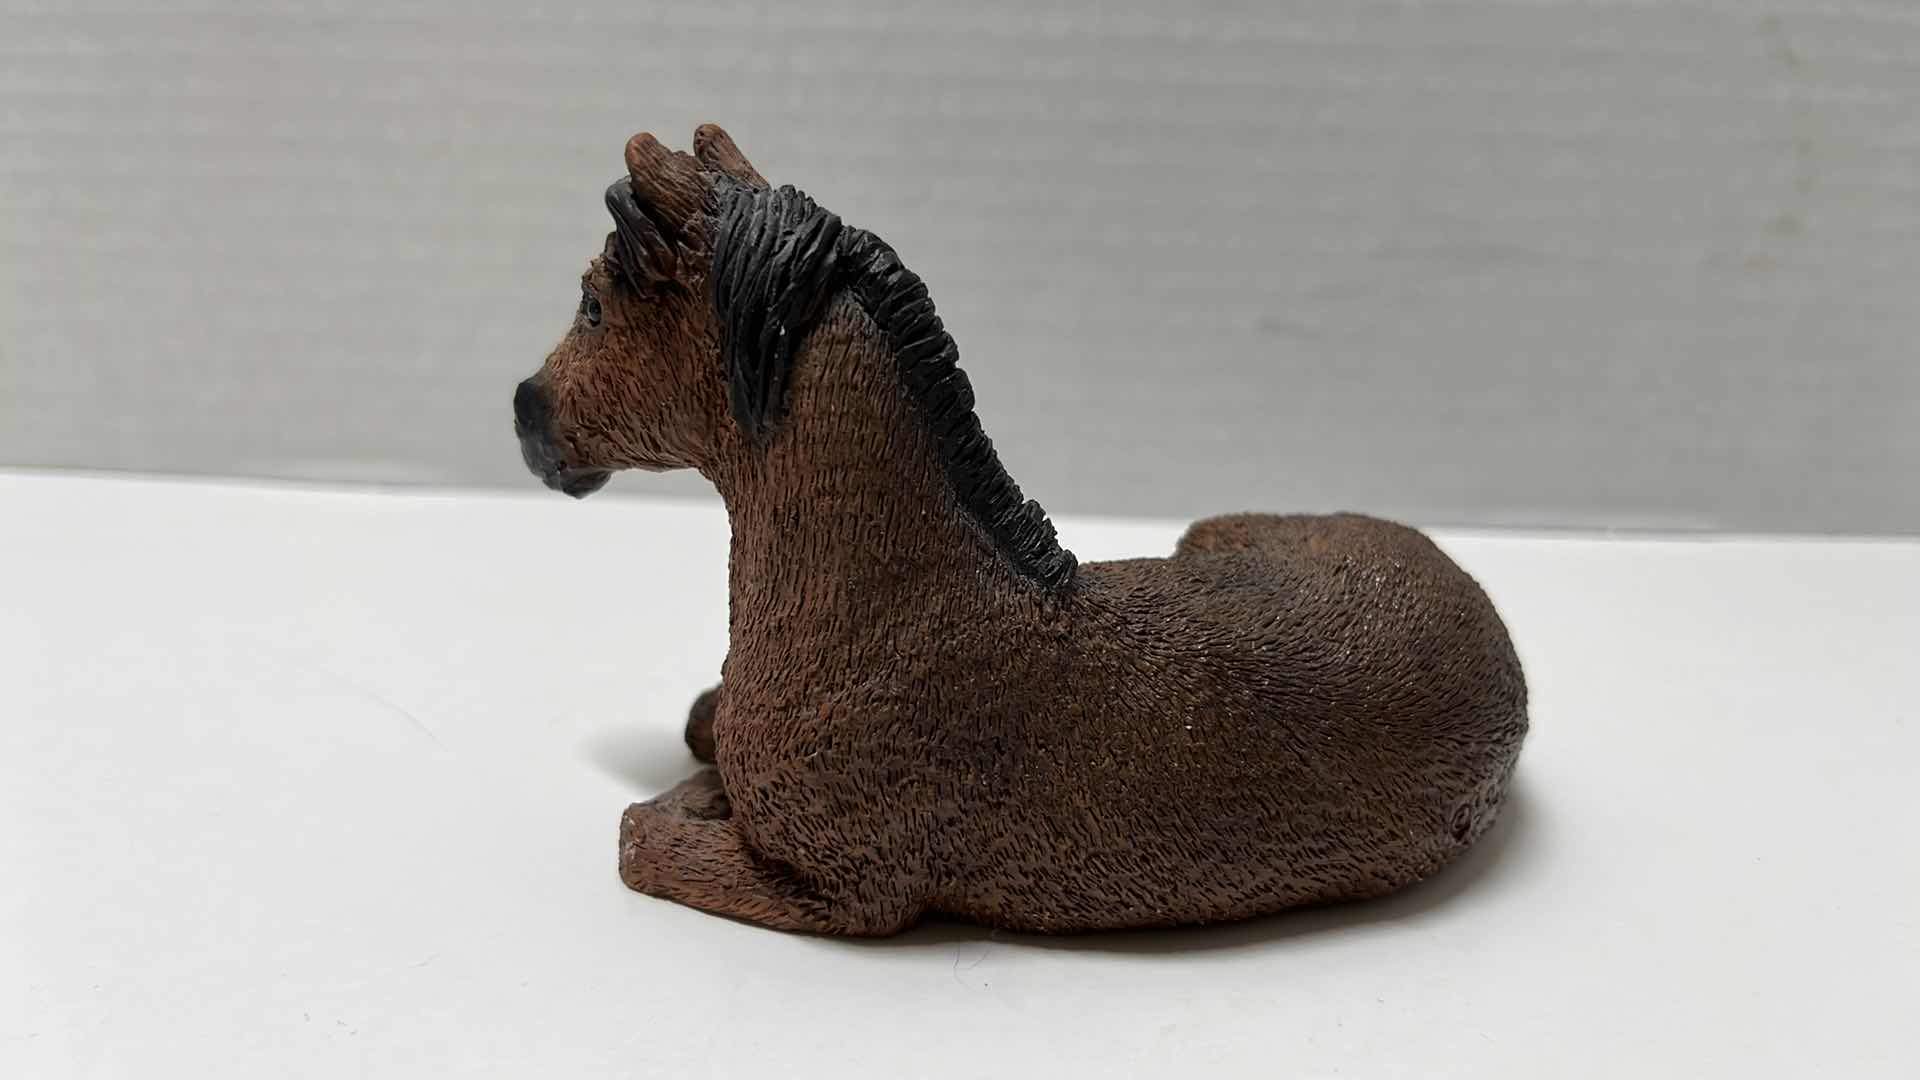 Photo 7 of CASTAGNA HORSE FIGURINE, 1988 MADE IN ITALY 2” X 7” H5” & STONE CRITTERS HORSE SORREL SC-410 FIGURINE (2)